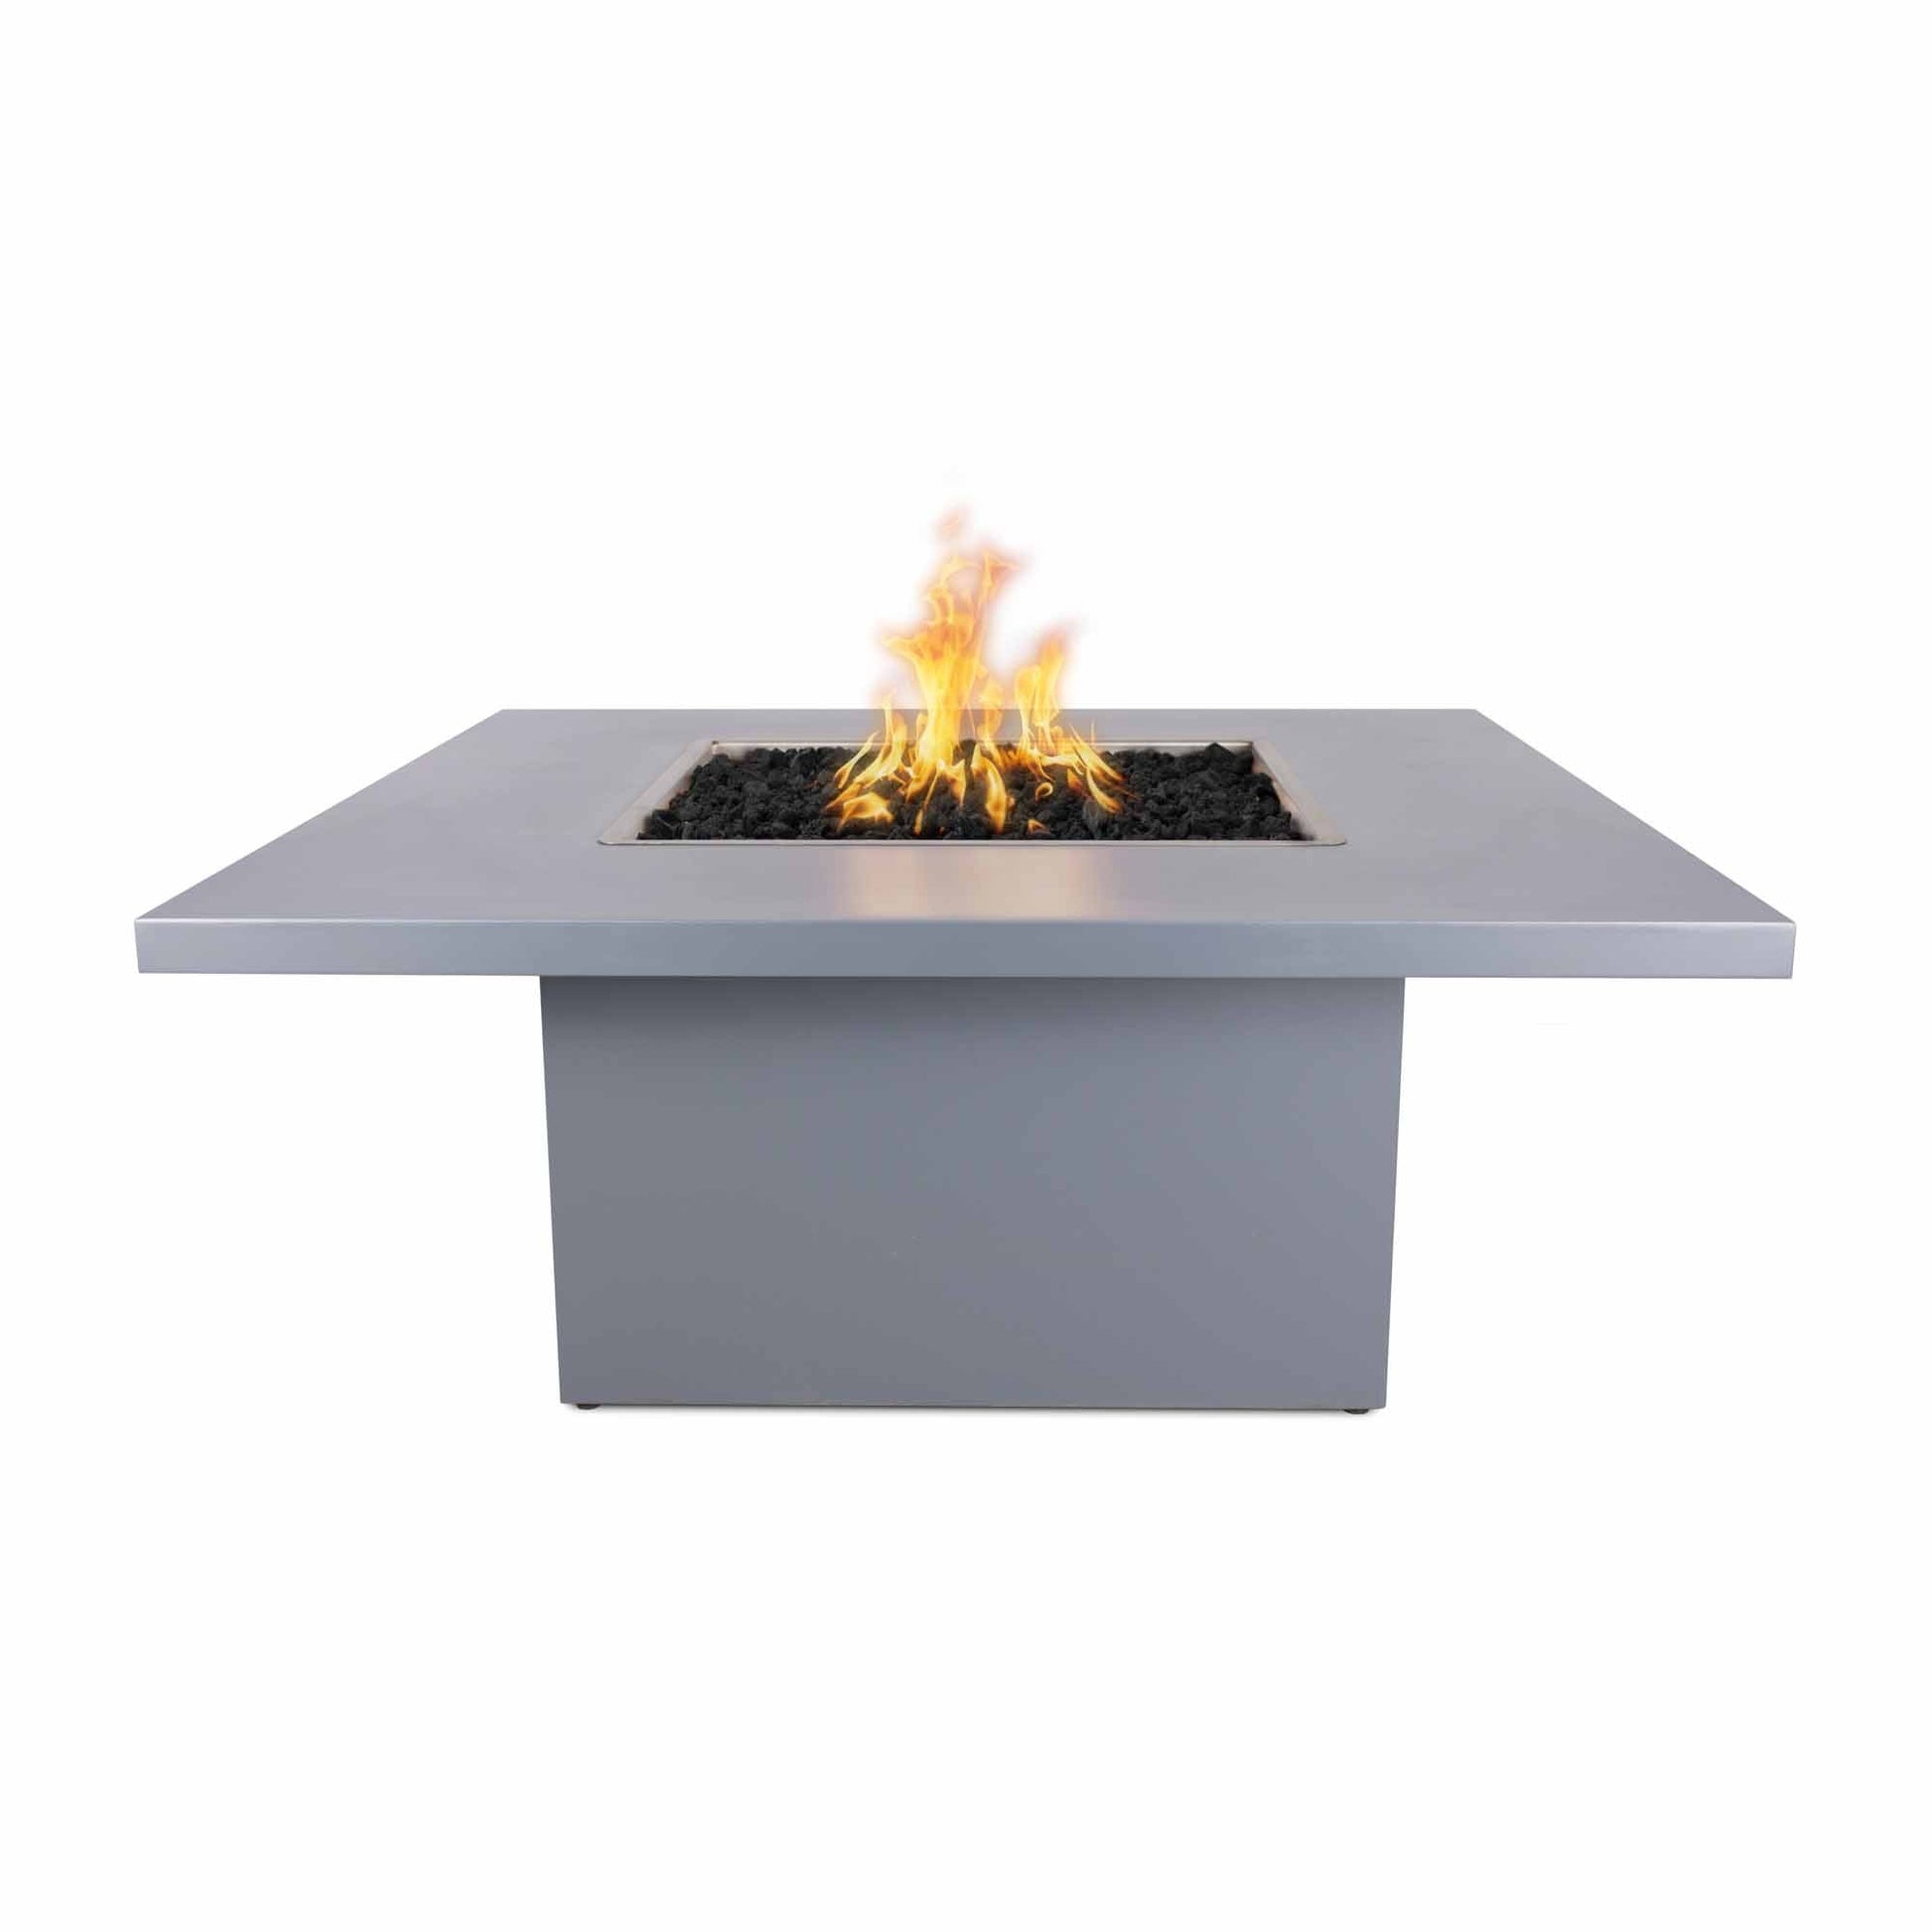 The Outdoor Plus Square Bella 36" Hammered Copper Liquid Propane Fire Pit with 12V Electronic Ignition